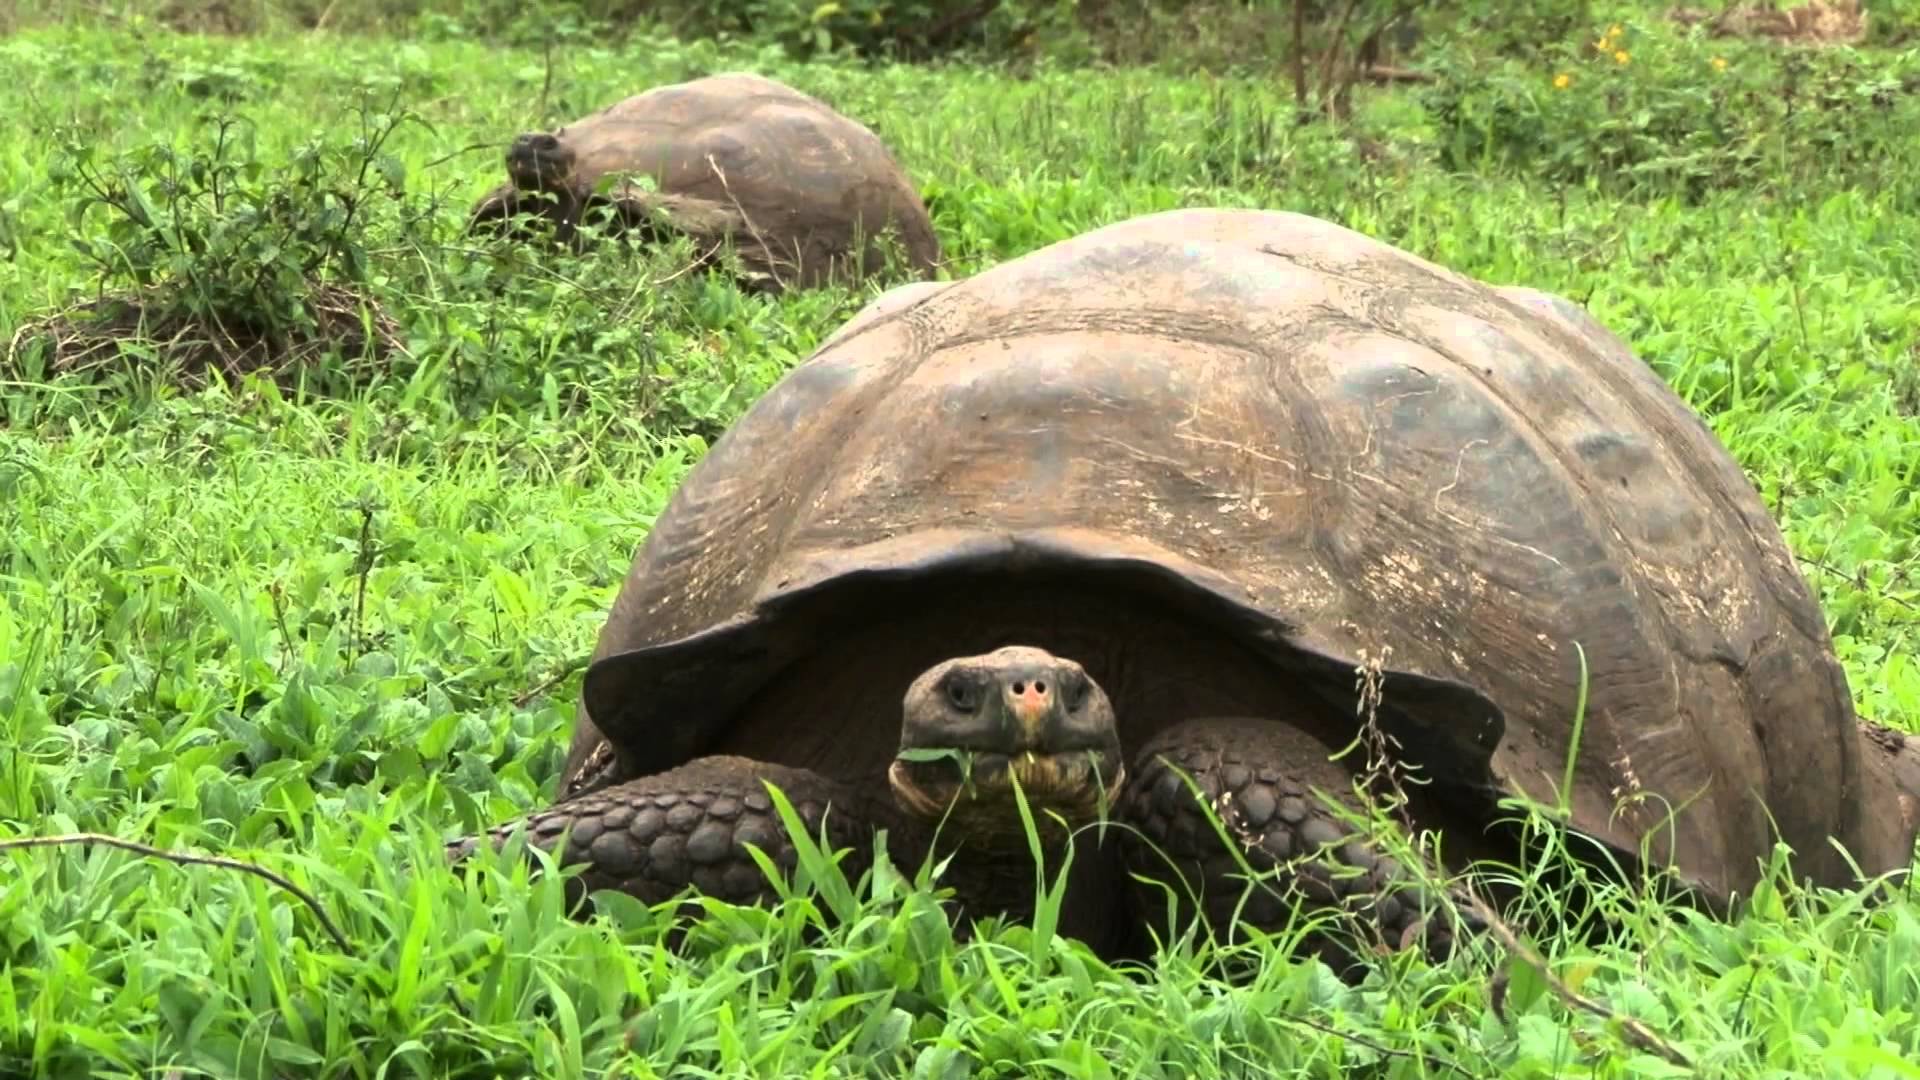 Galápagos Giant Tortoise Conservation